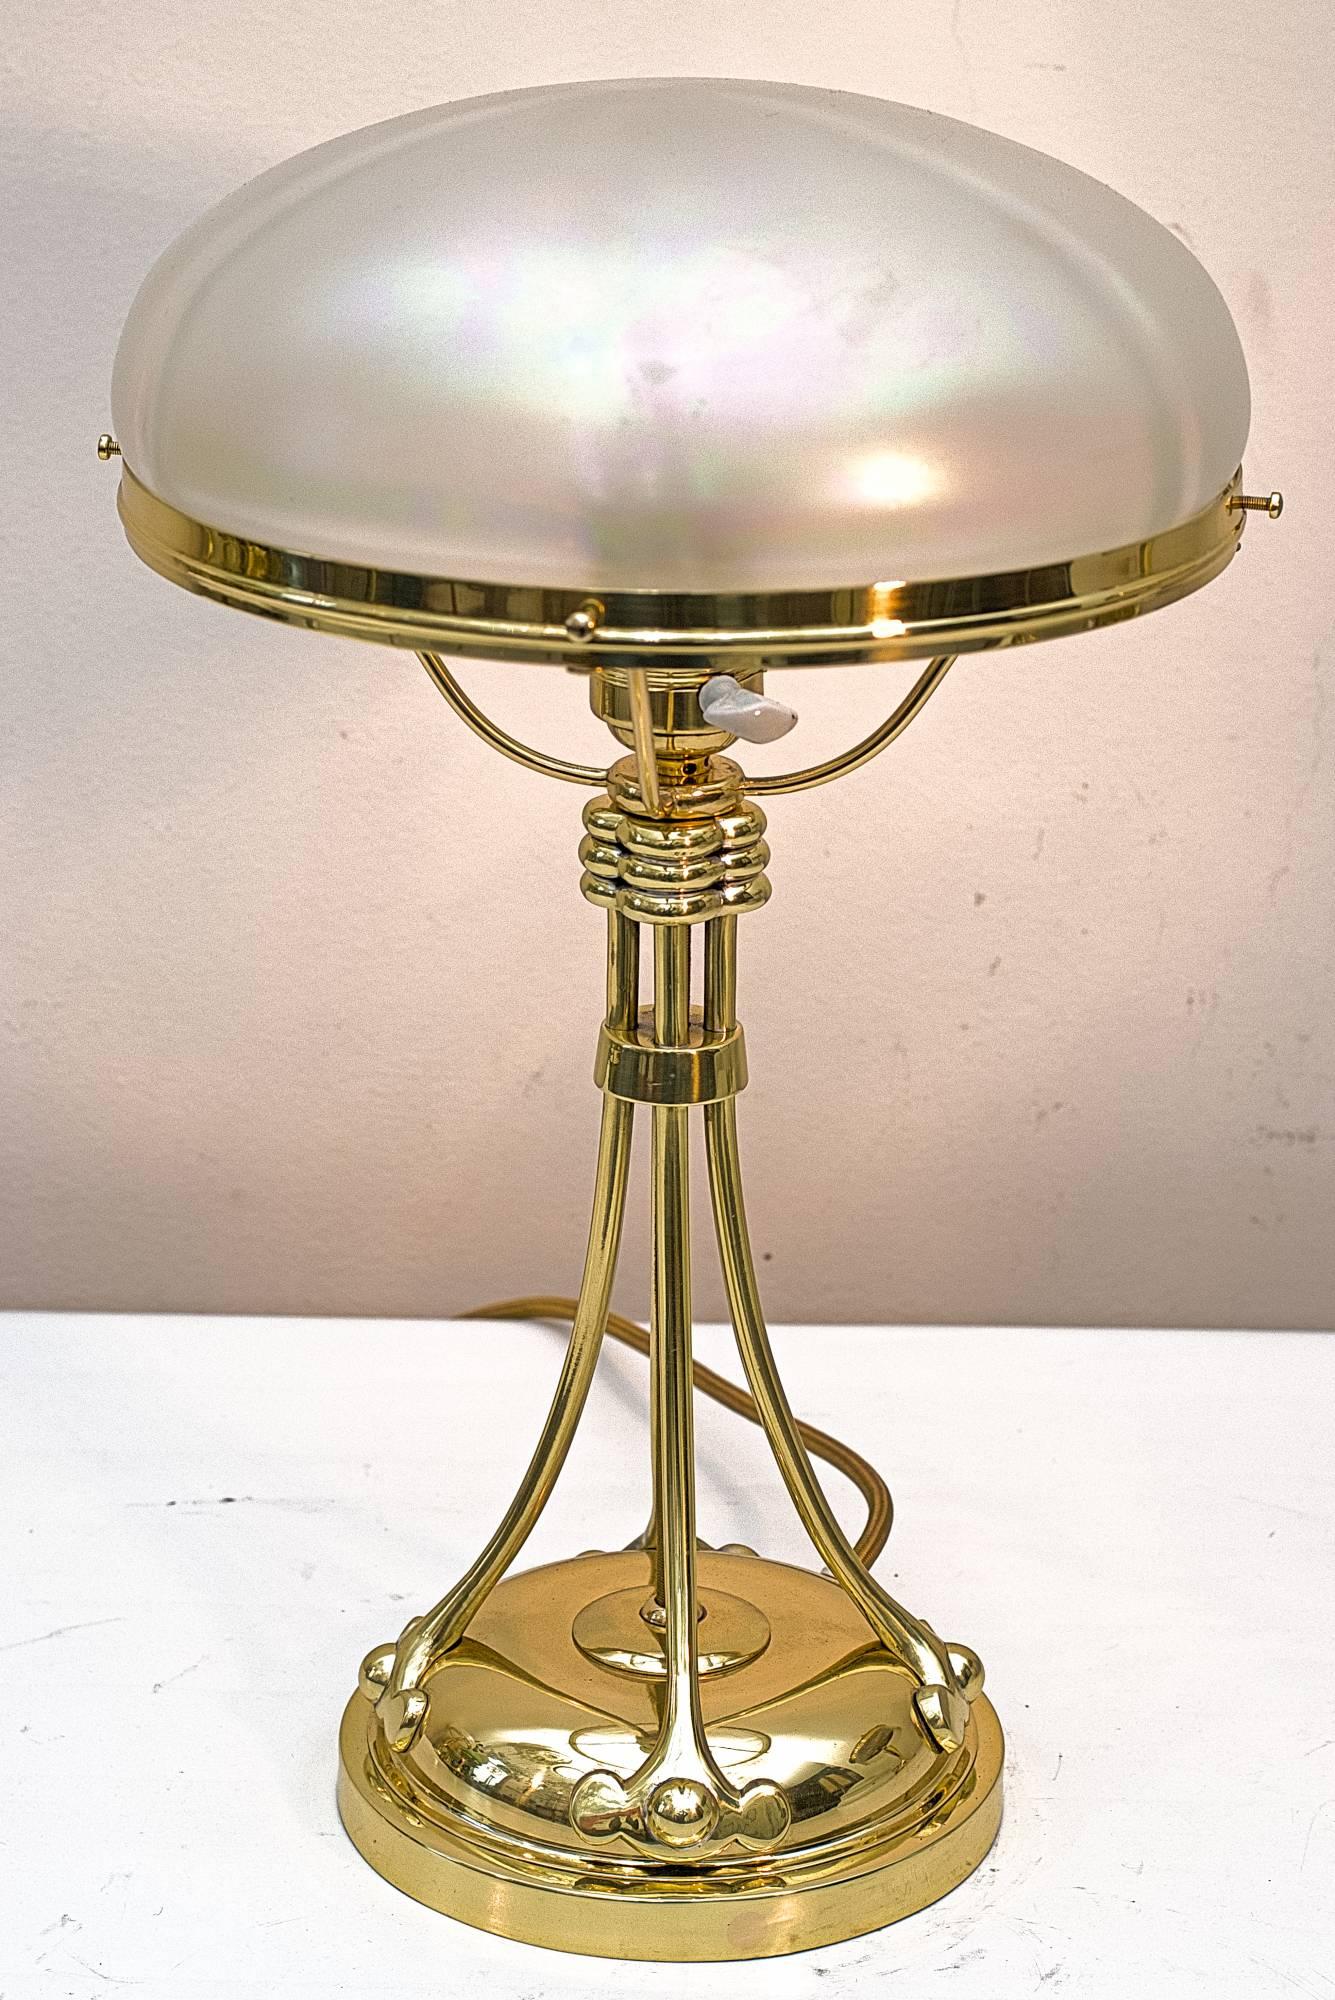 Charming Jugendstil table lamp with beautiful glass polished and stove enameled.